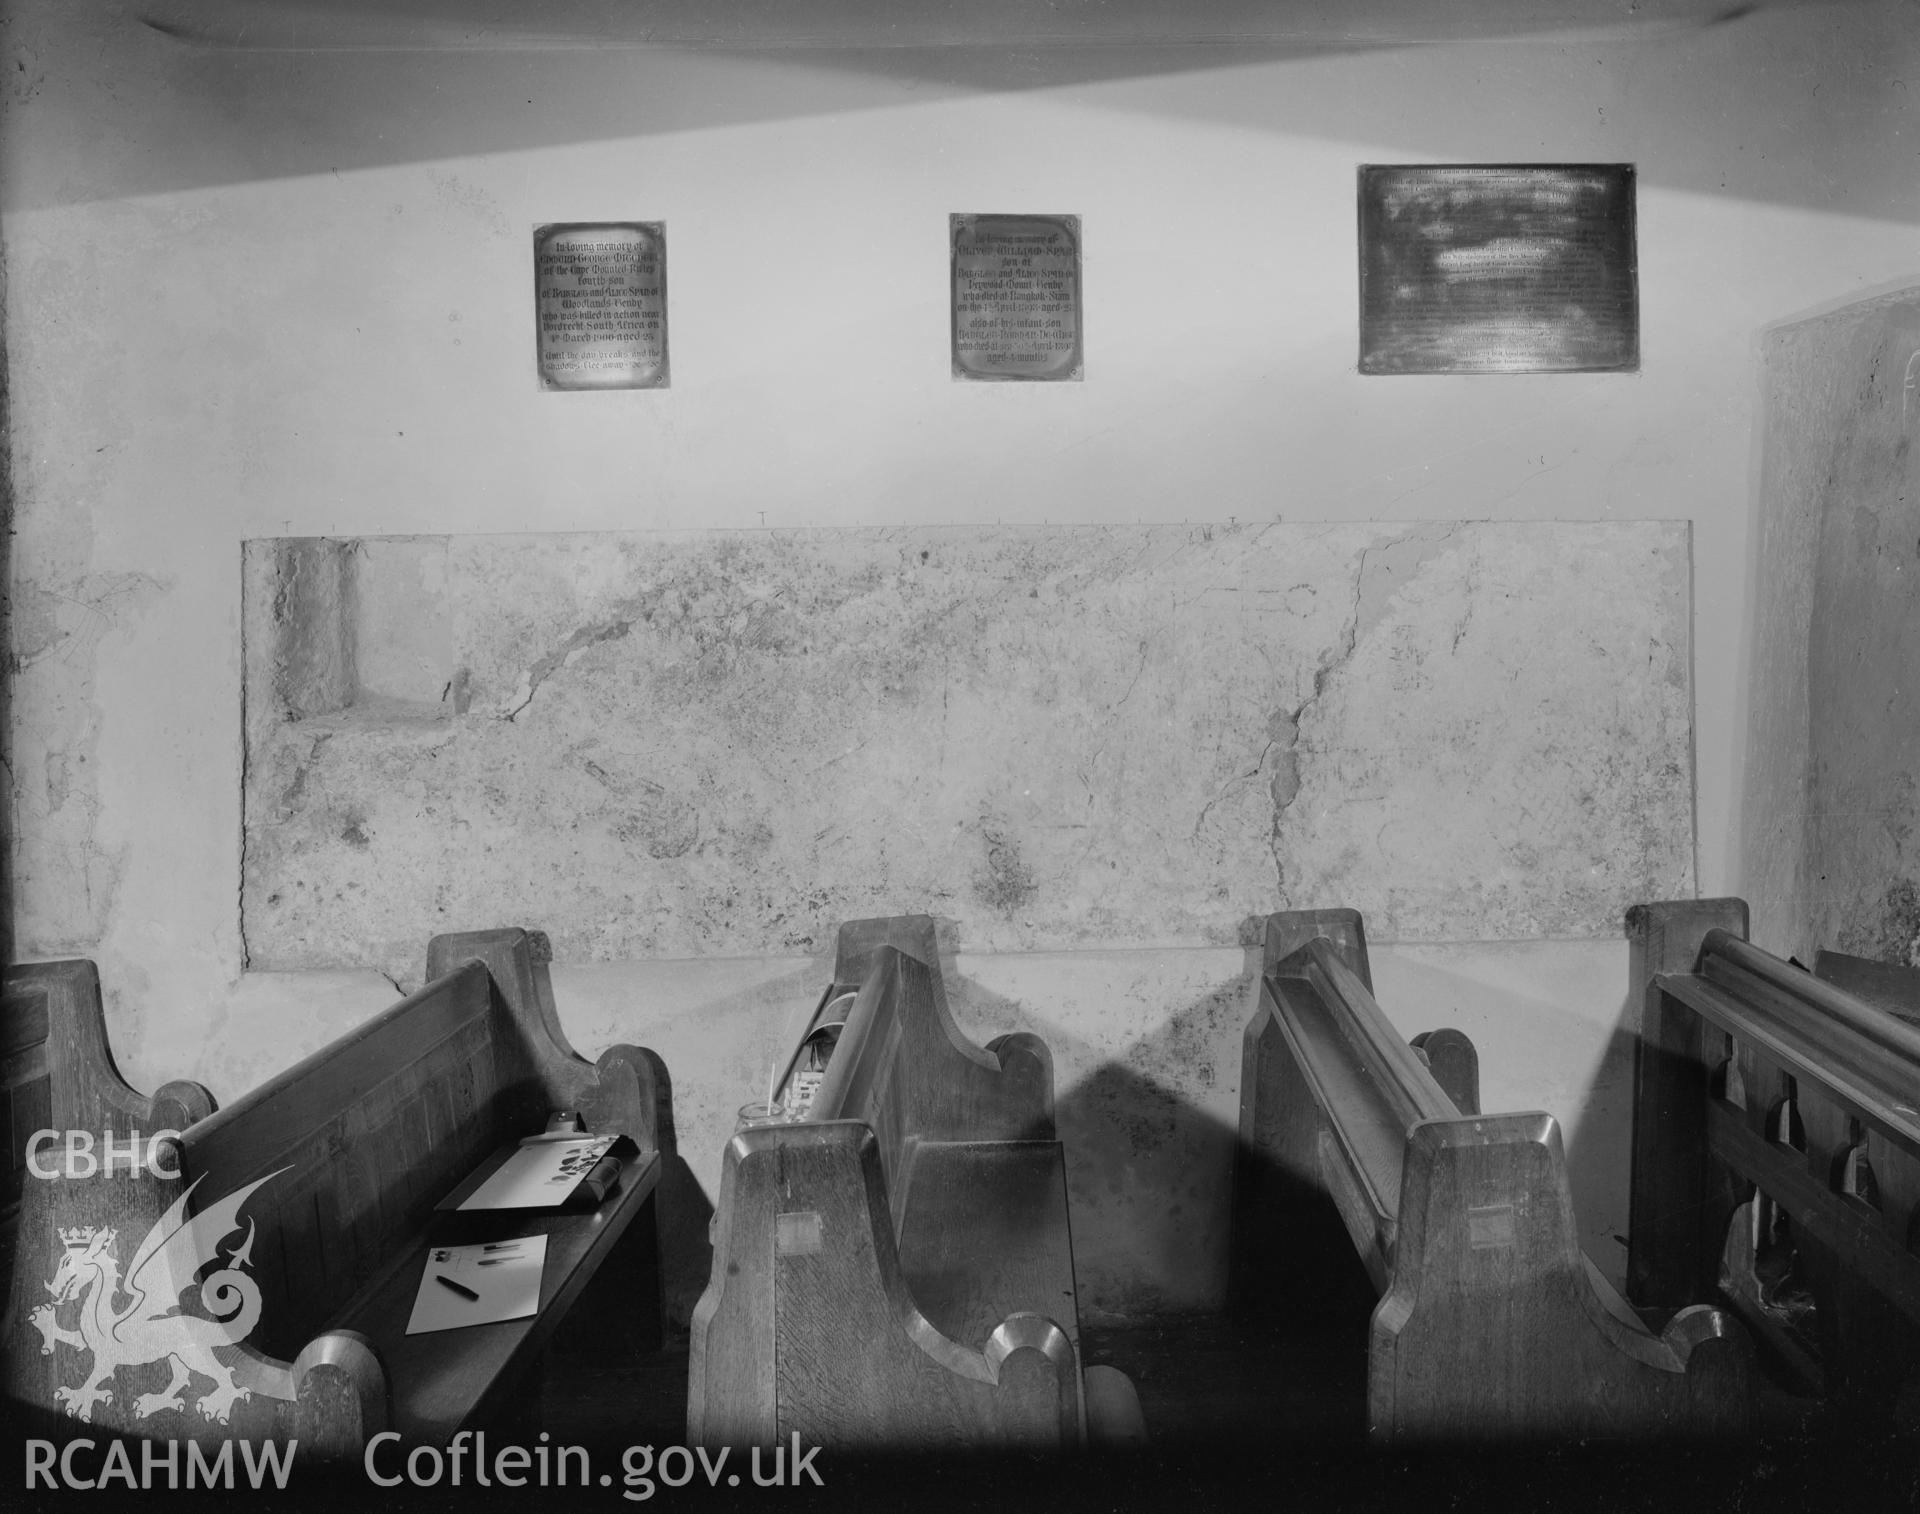 Black and white acetate negative showing interior view of Gumfreston Church.